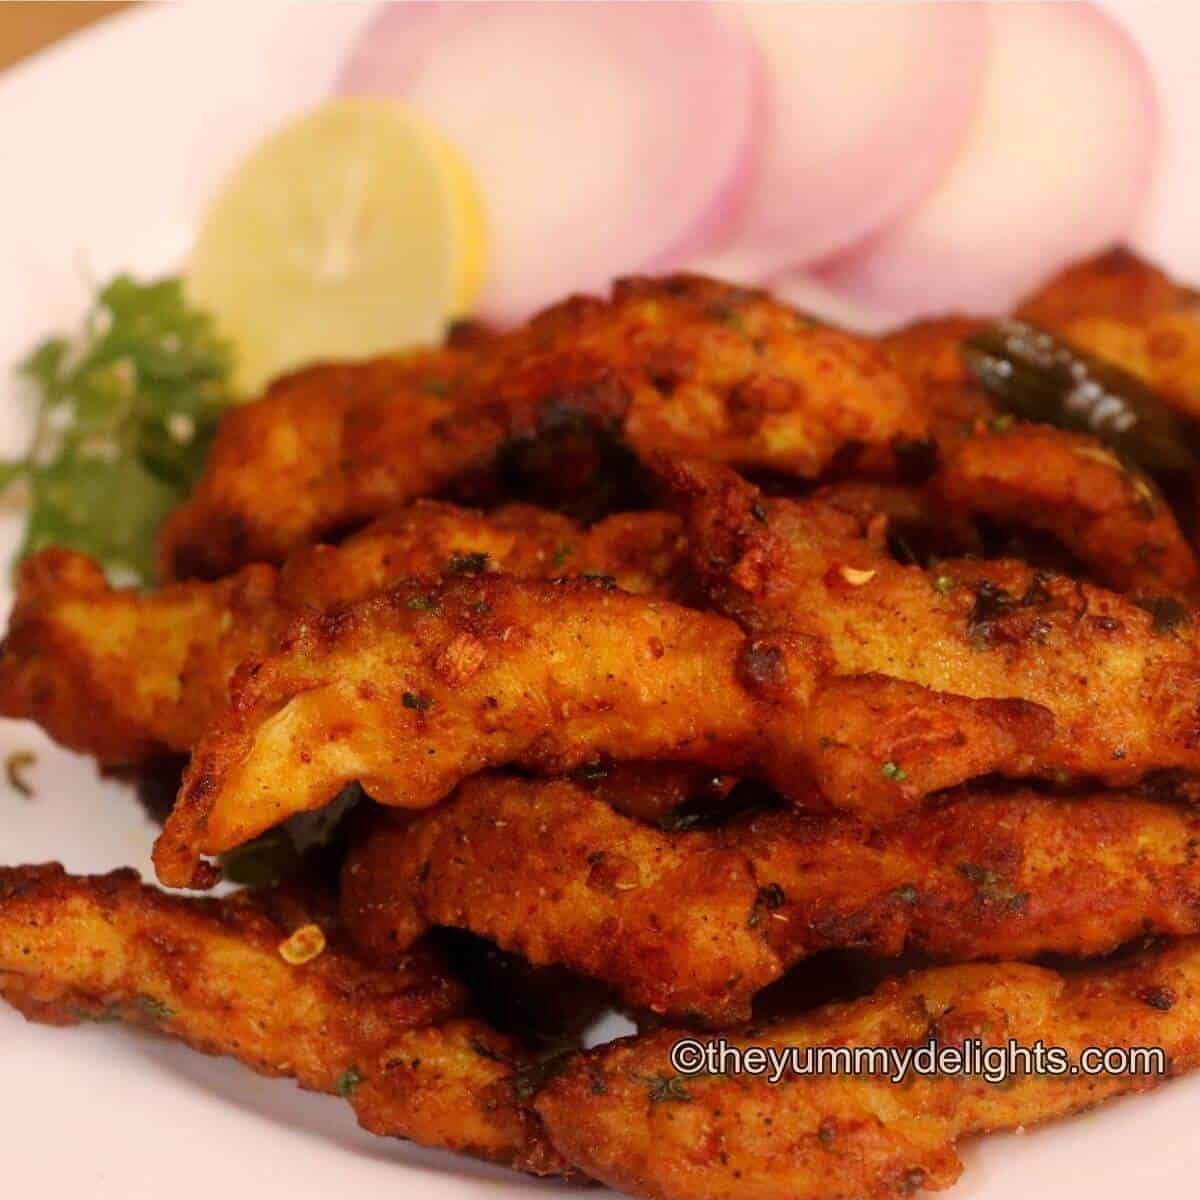 Hyderabadi chicken majestic served on a white plate. Served with onion slices, lemon wedge & coriander leaves.